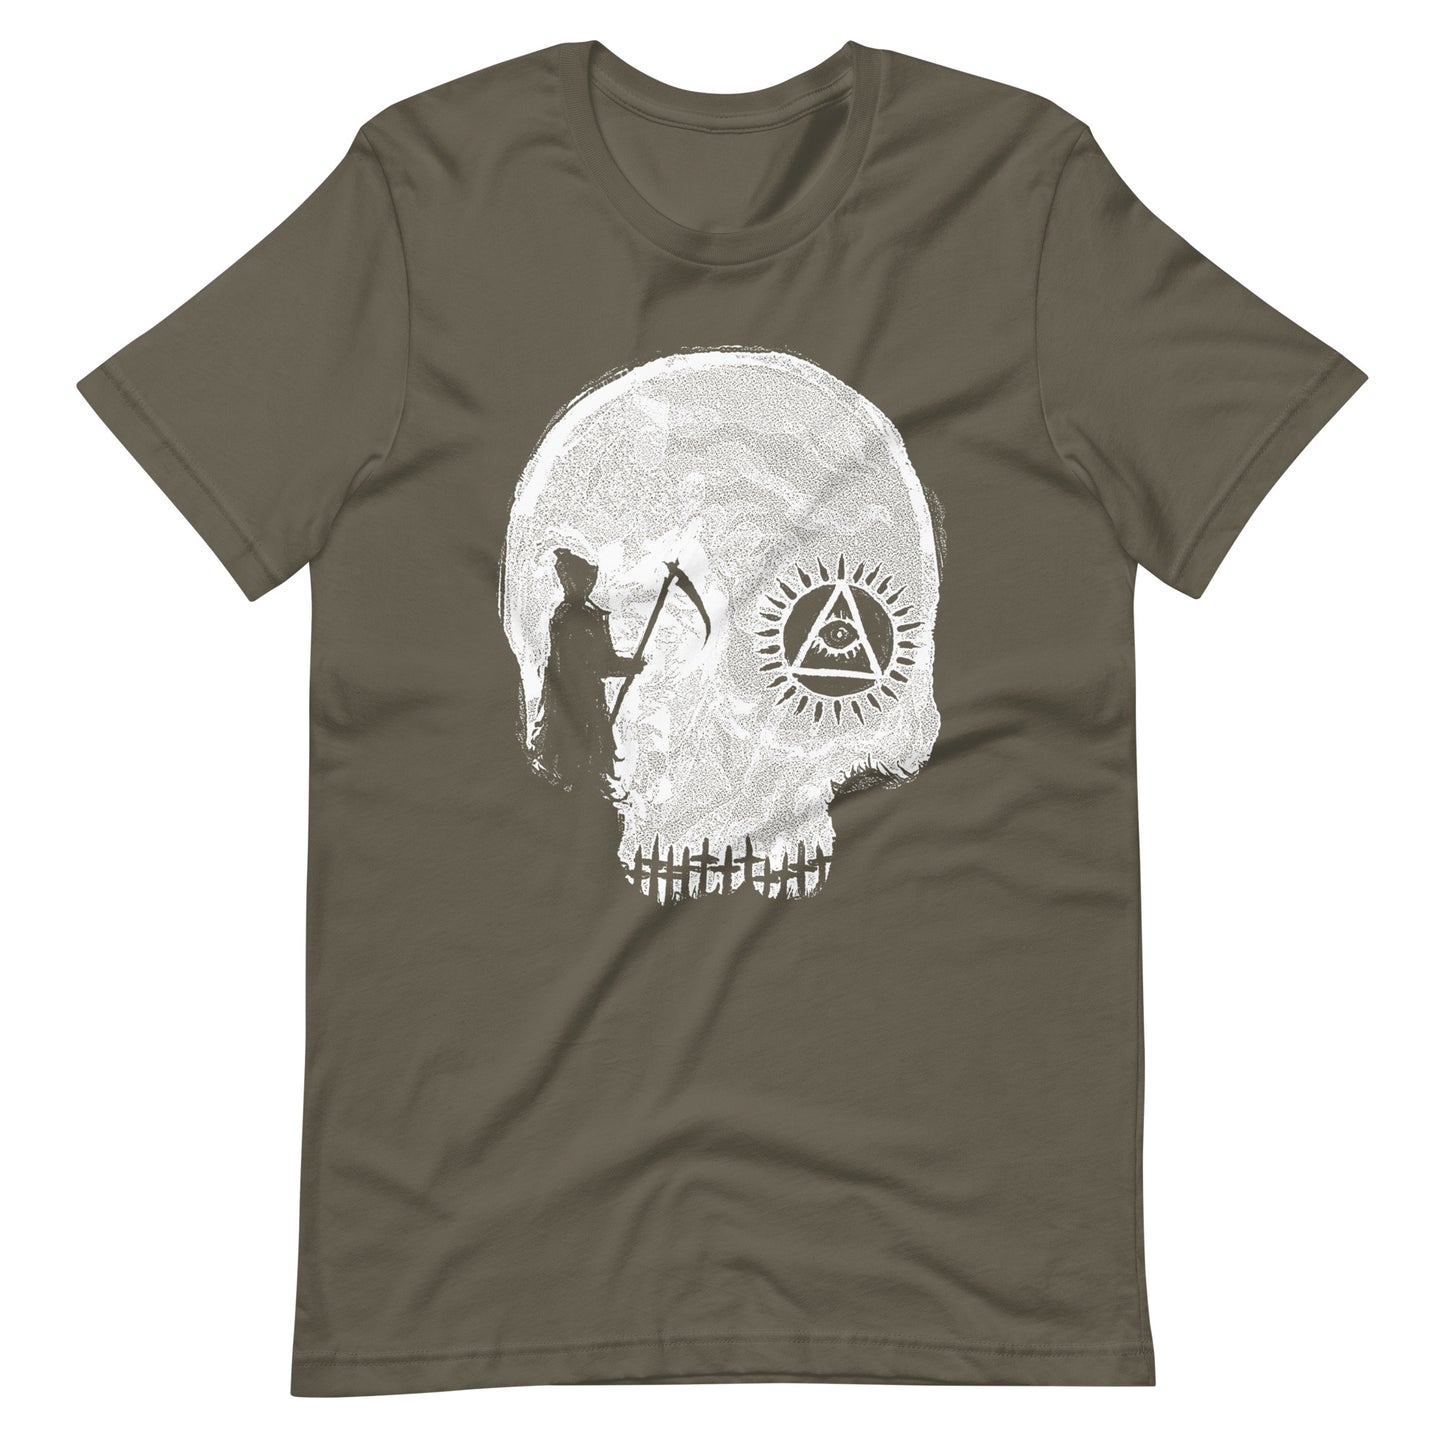 Death Row - Men's t-shirt - Army Front